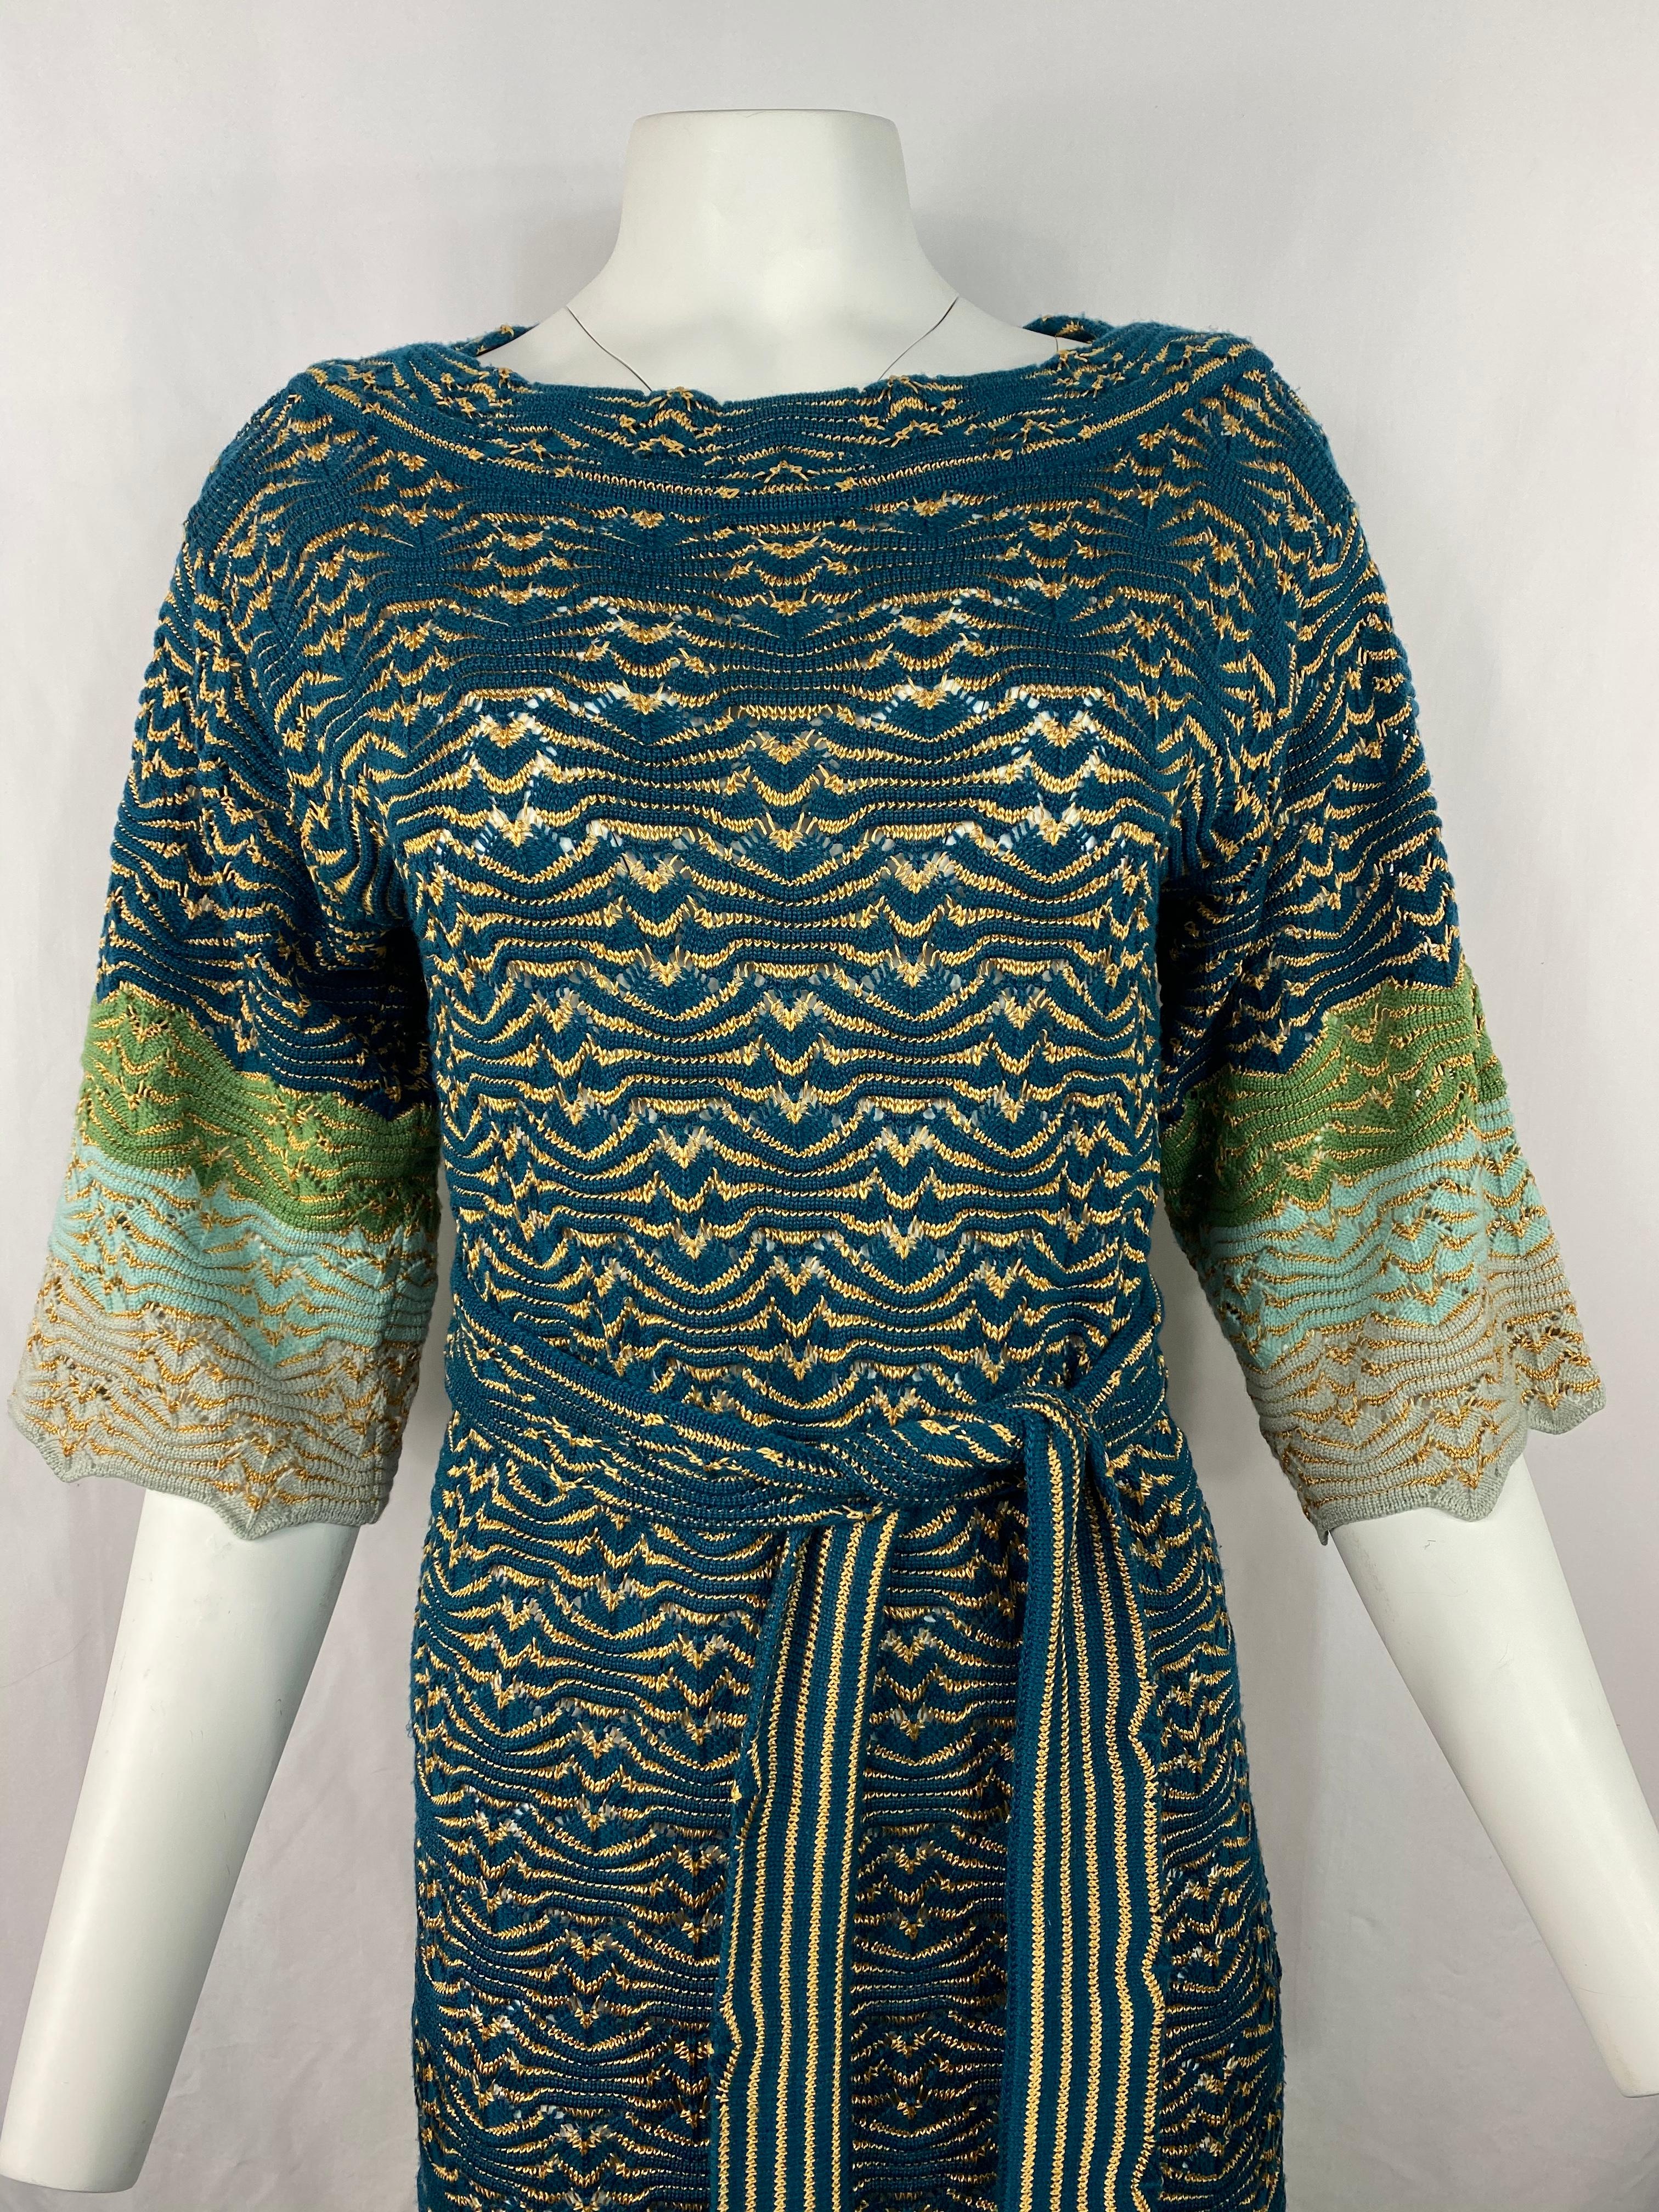 Product details:

Featuring blue, green and brown knit abstract striped detail, knee length, 3/4 flare sleeves ( measure 16